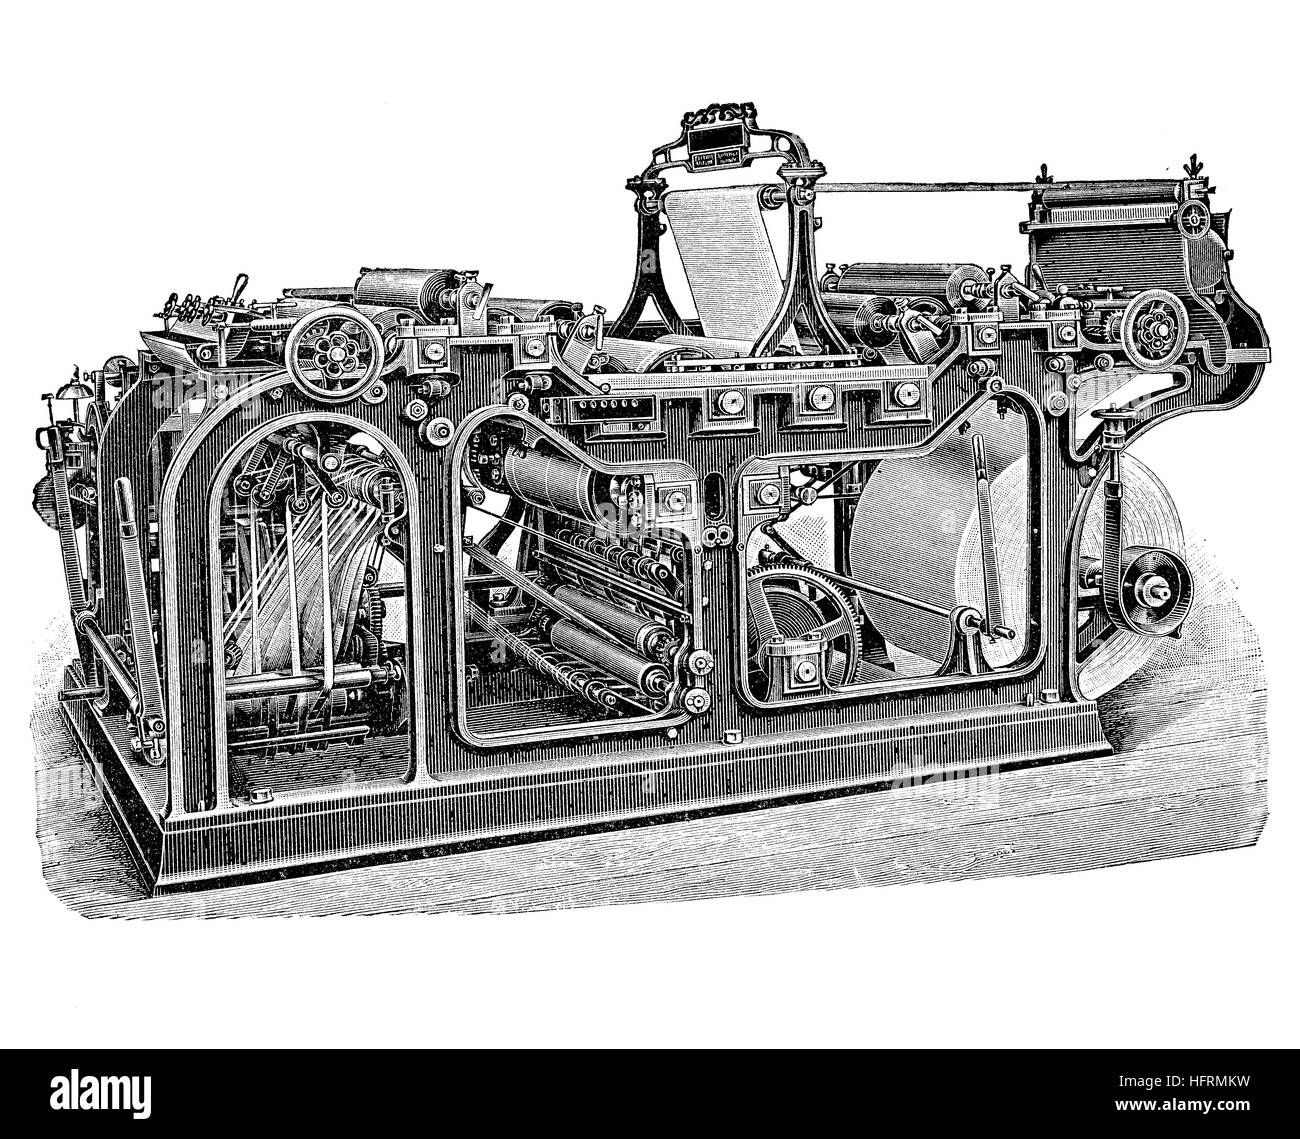 Rotary printing press for mass production of newspapers and magazines, XIX century engraving Stock Photo